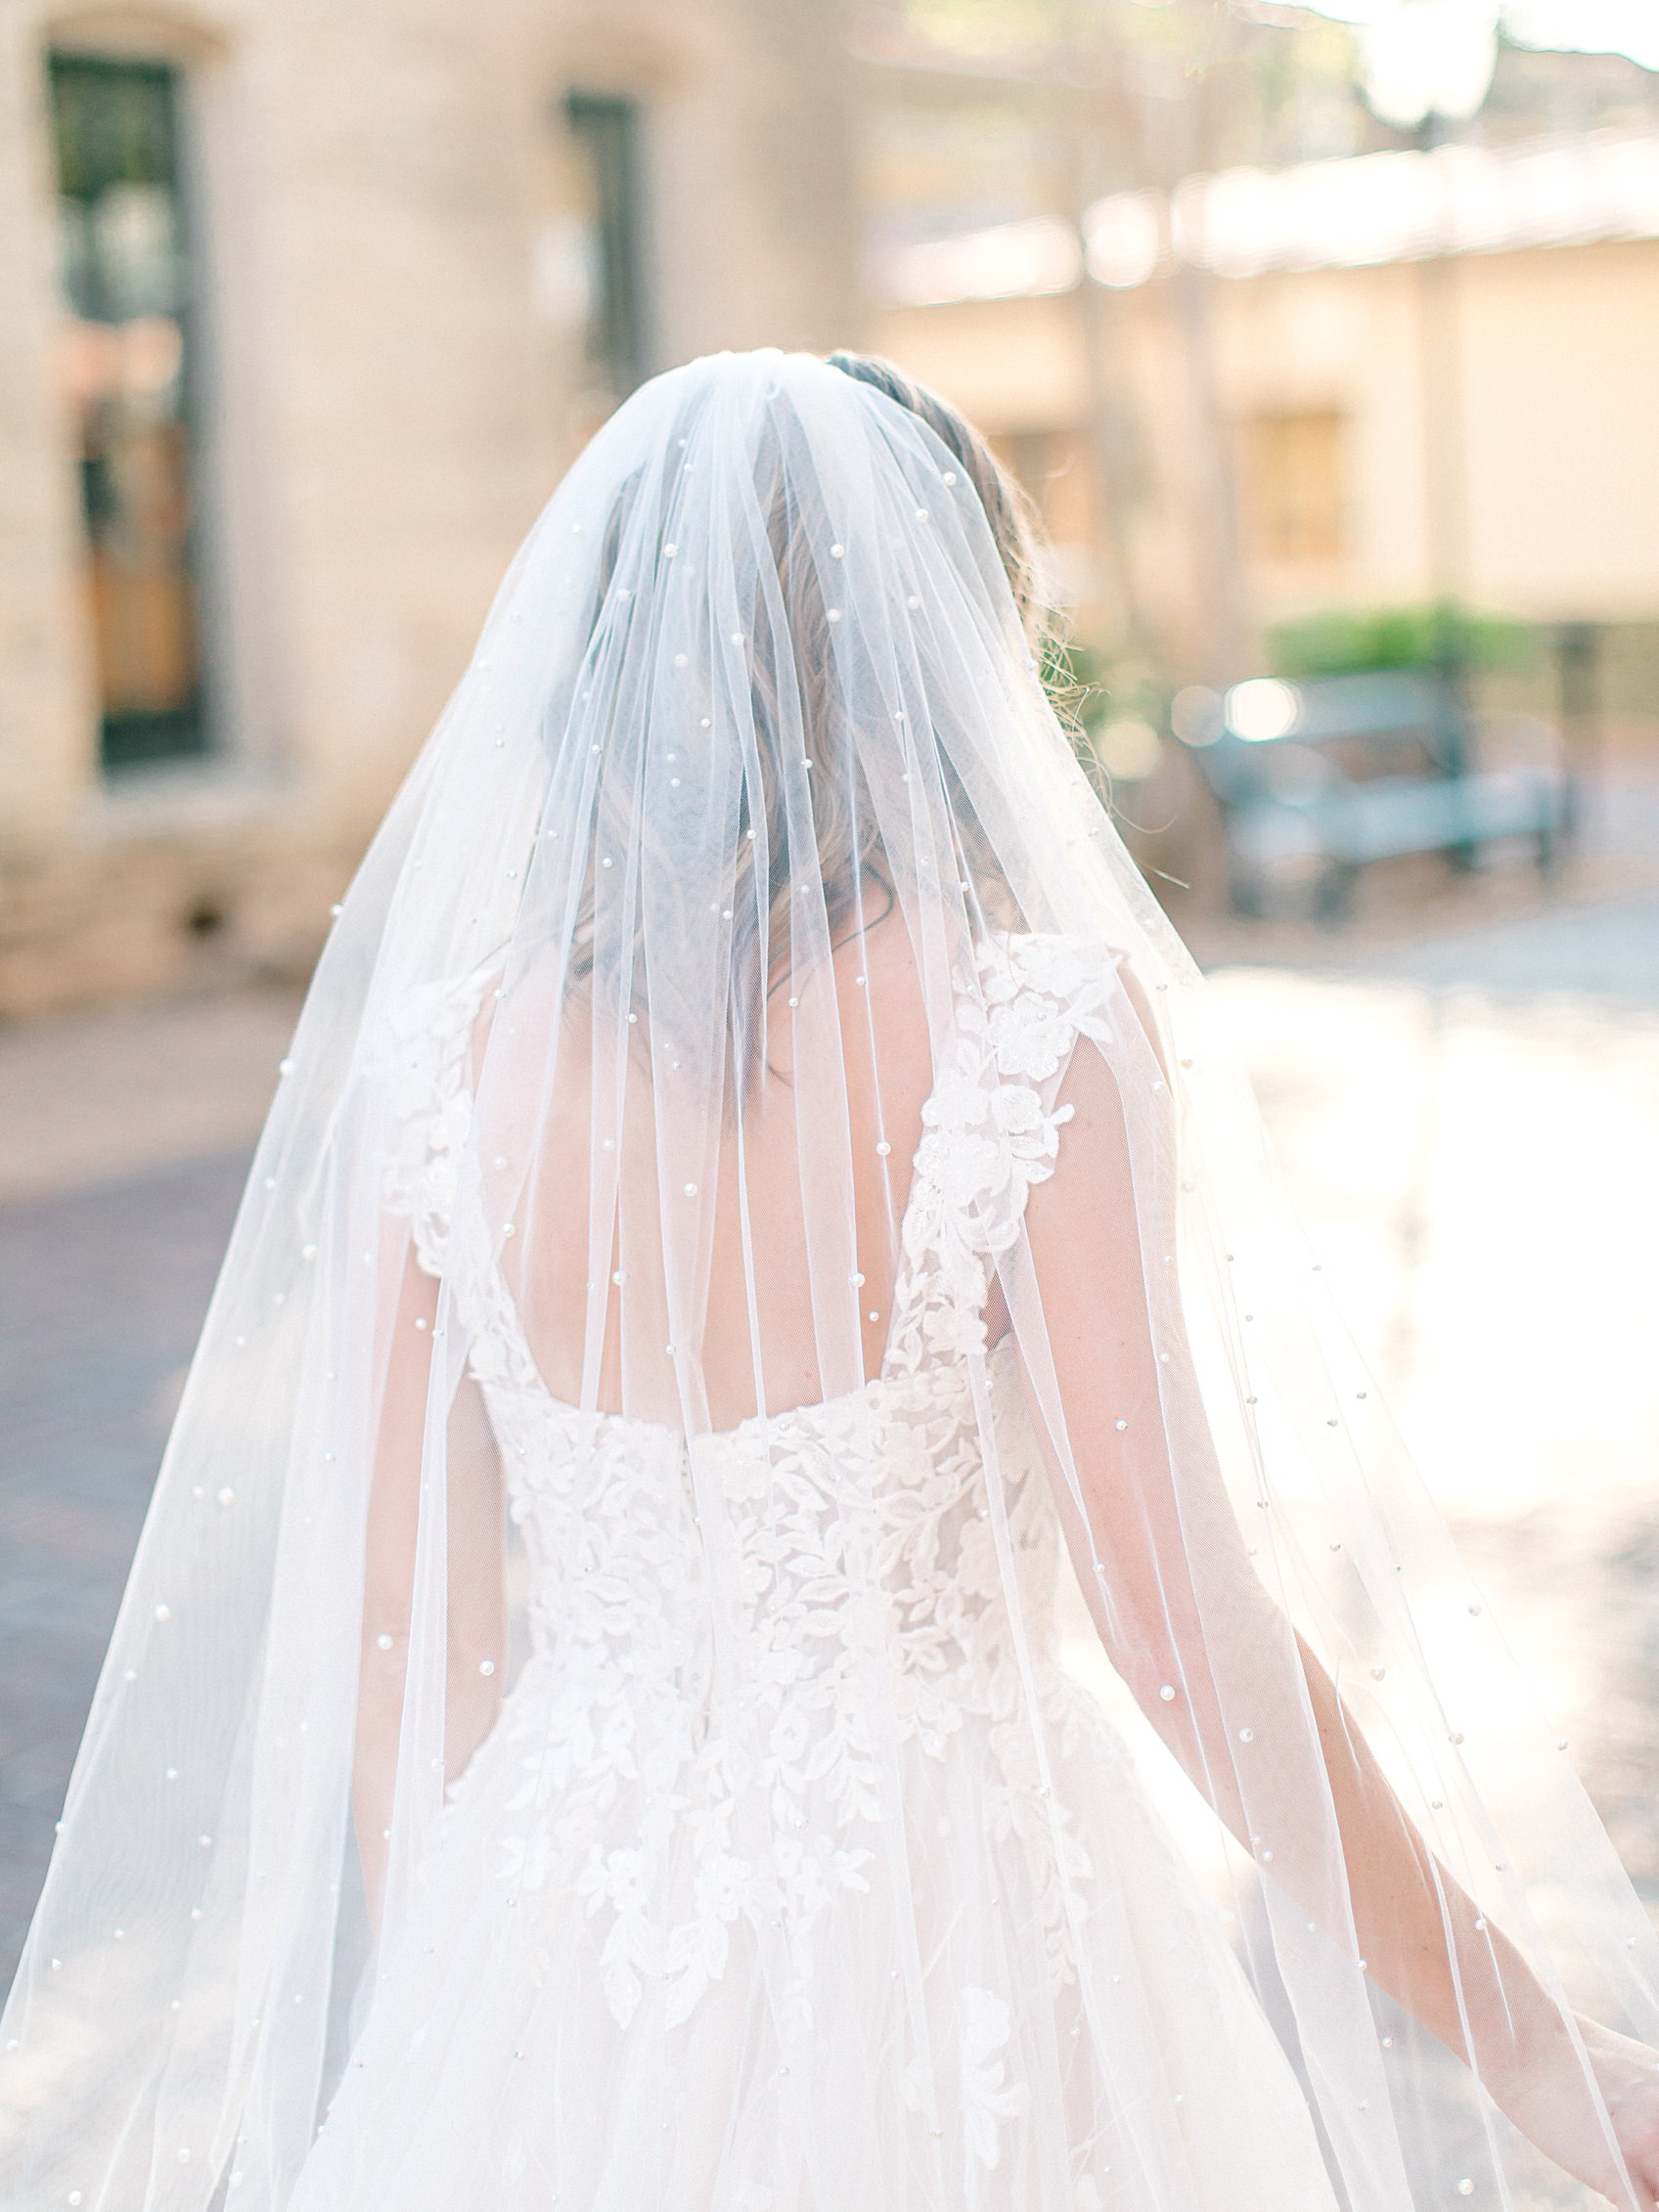 Downtown San Antonio Bridal Photography Session by Allison Jeffers Wedding Photography 0018